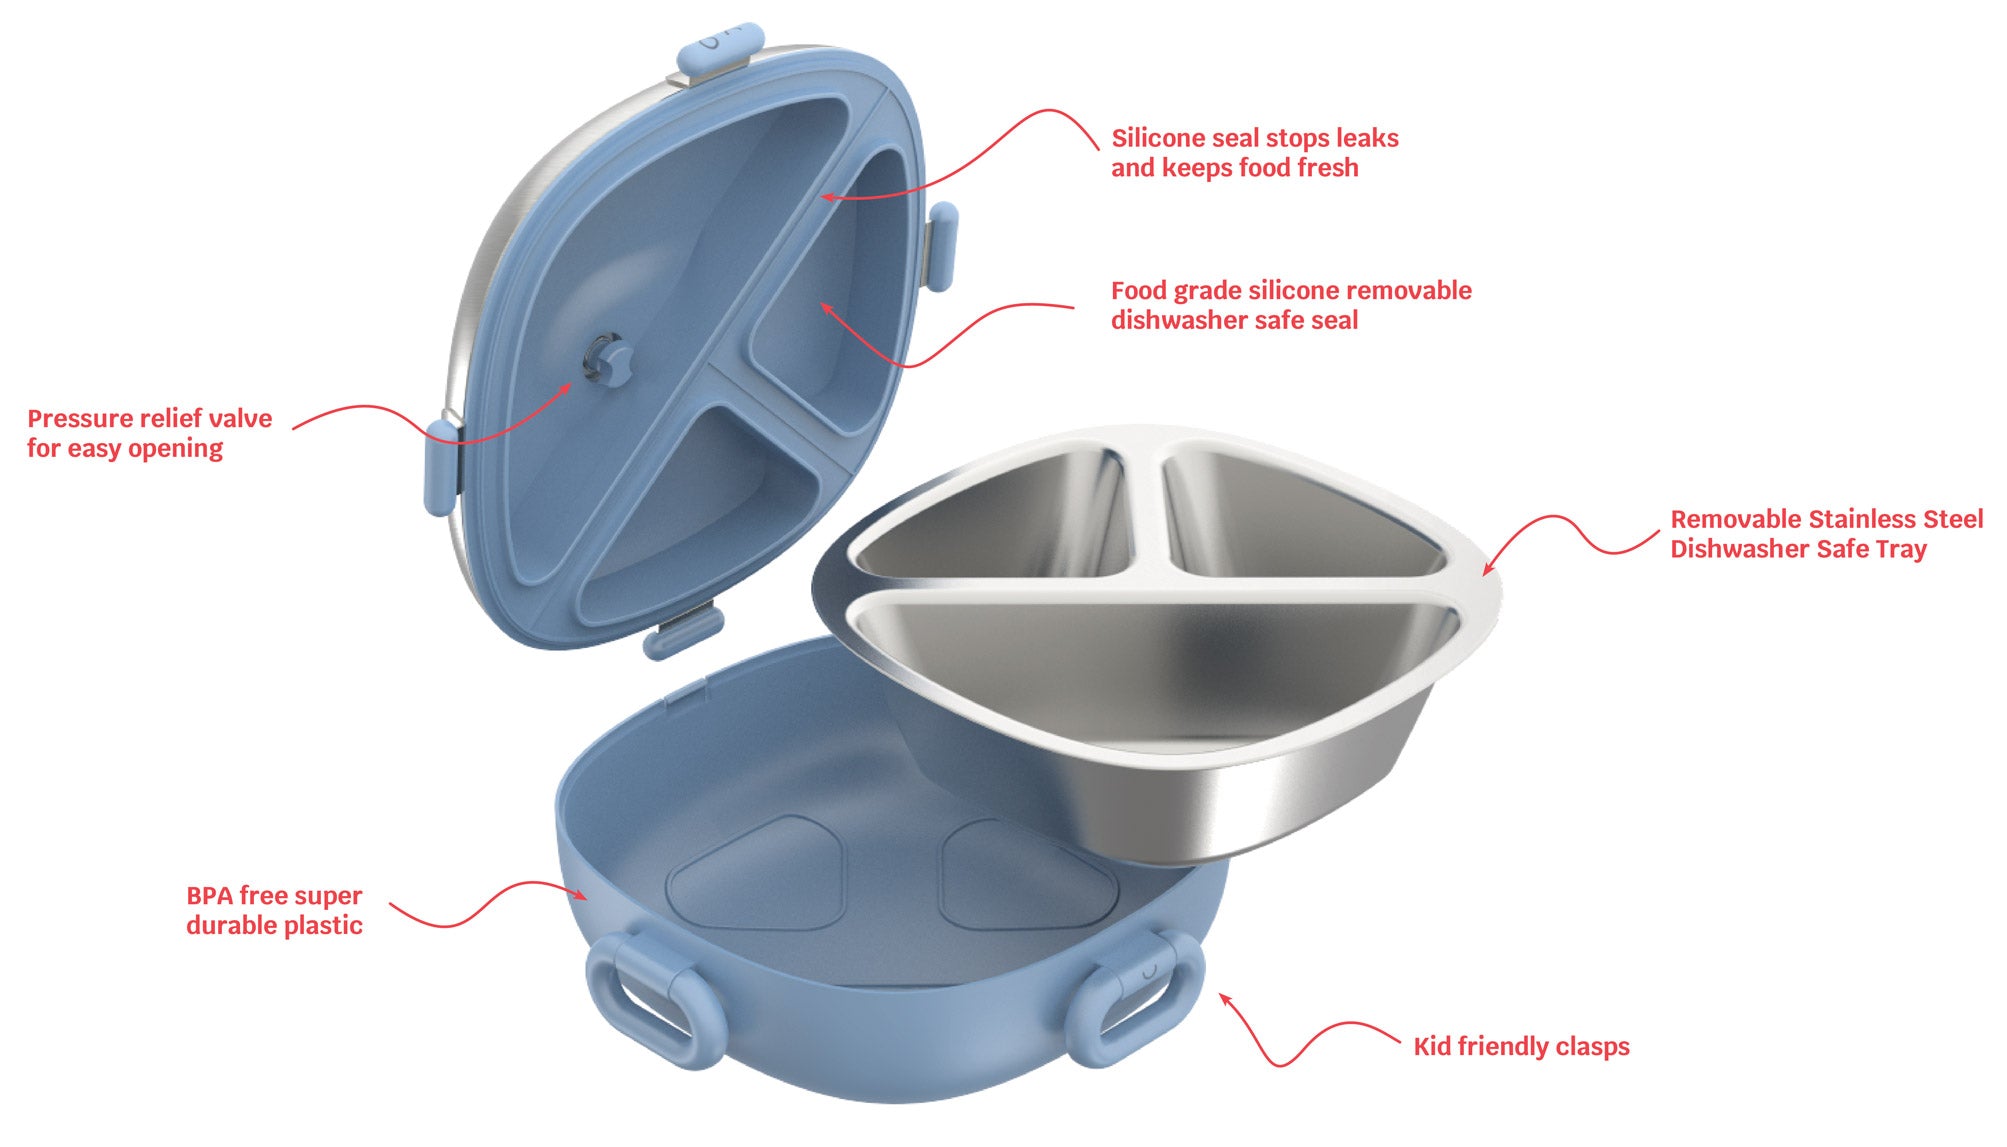 Exploded view of a bento lunch box highlighting its features: a pressure relief valve for easy opening, a silicone seal to stop leaks and keep food fresh, a food-grade silicone removable dishwasher safe seal, BPA-free durable plastic construction, and kid-friendly clasps, with a removable stainless steel tray also suitable for the dishwasher.